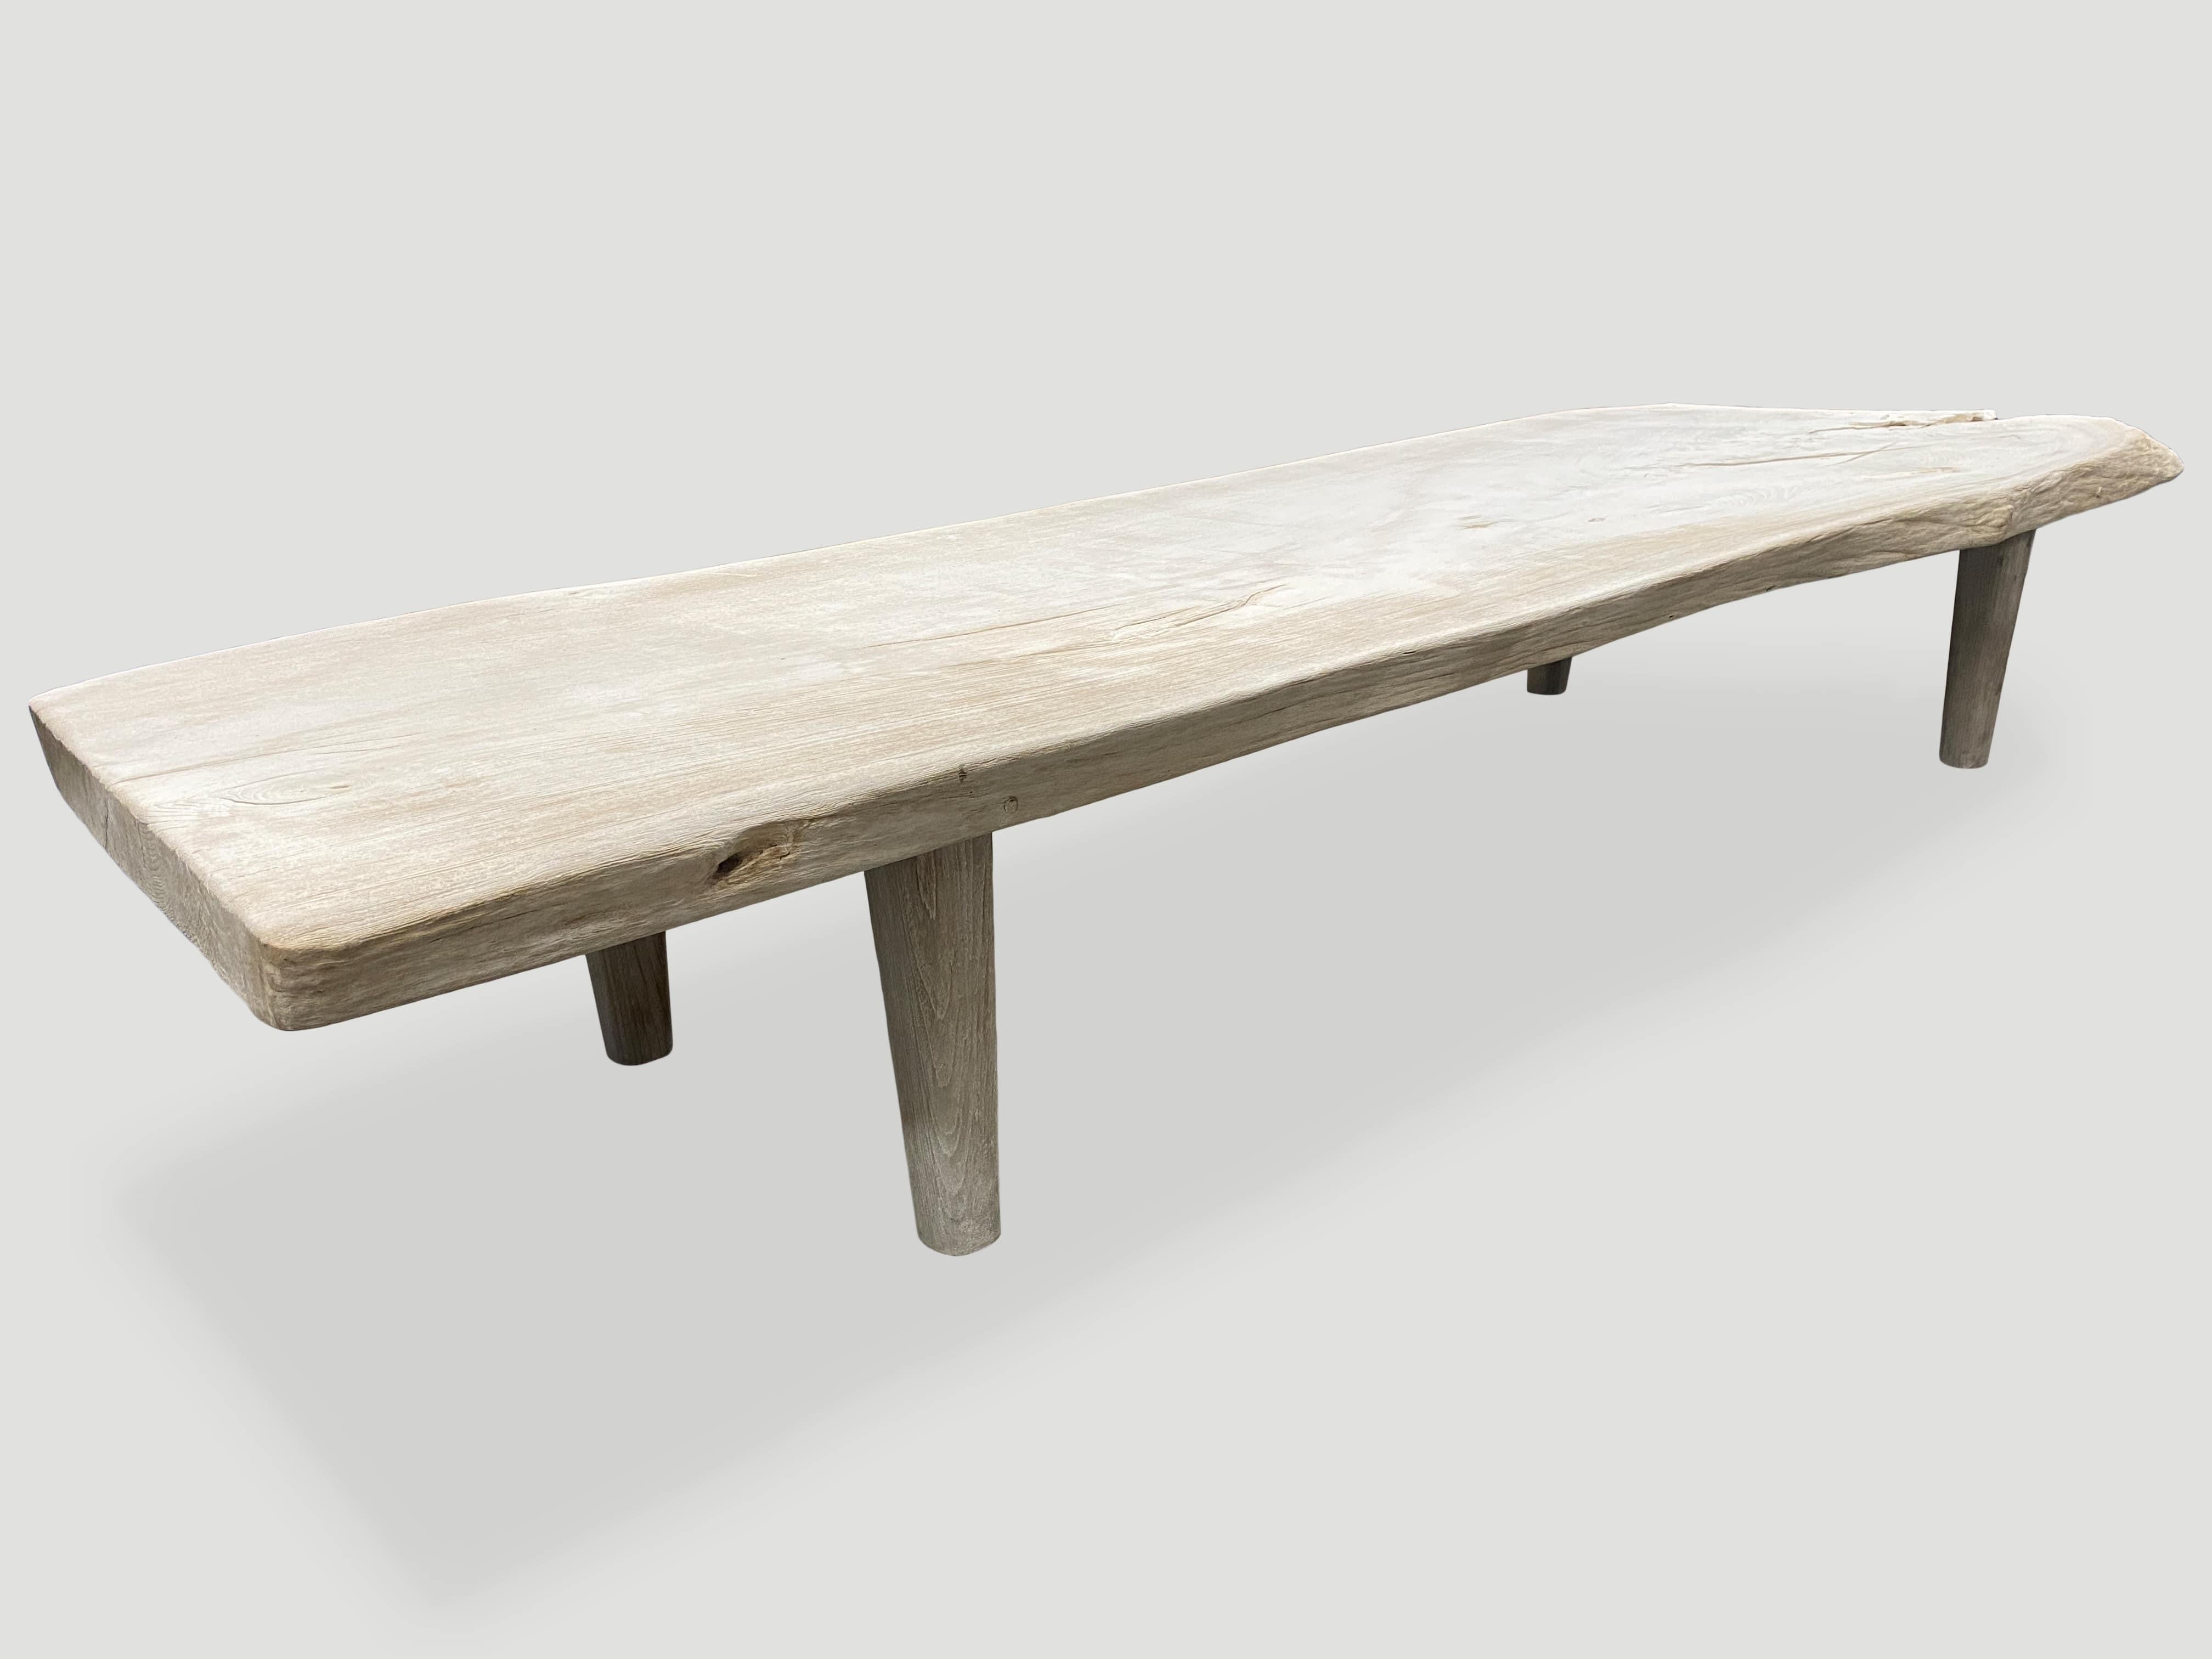 Contemporary Andrianna Shamaris Minimalist Bleached Teak Wood Coffee Table or Bench For Sale